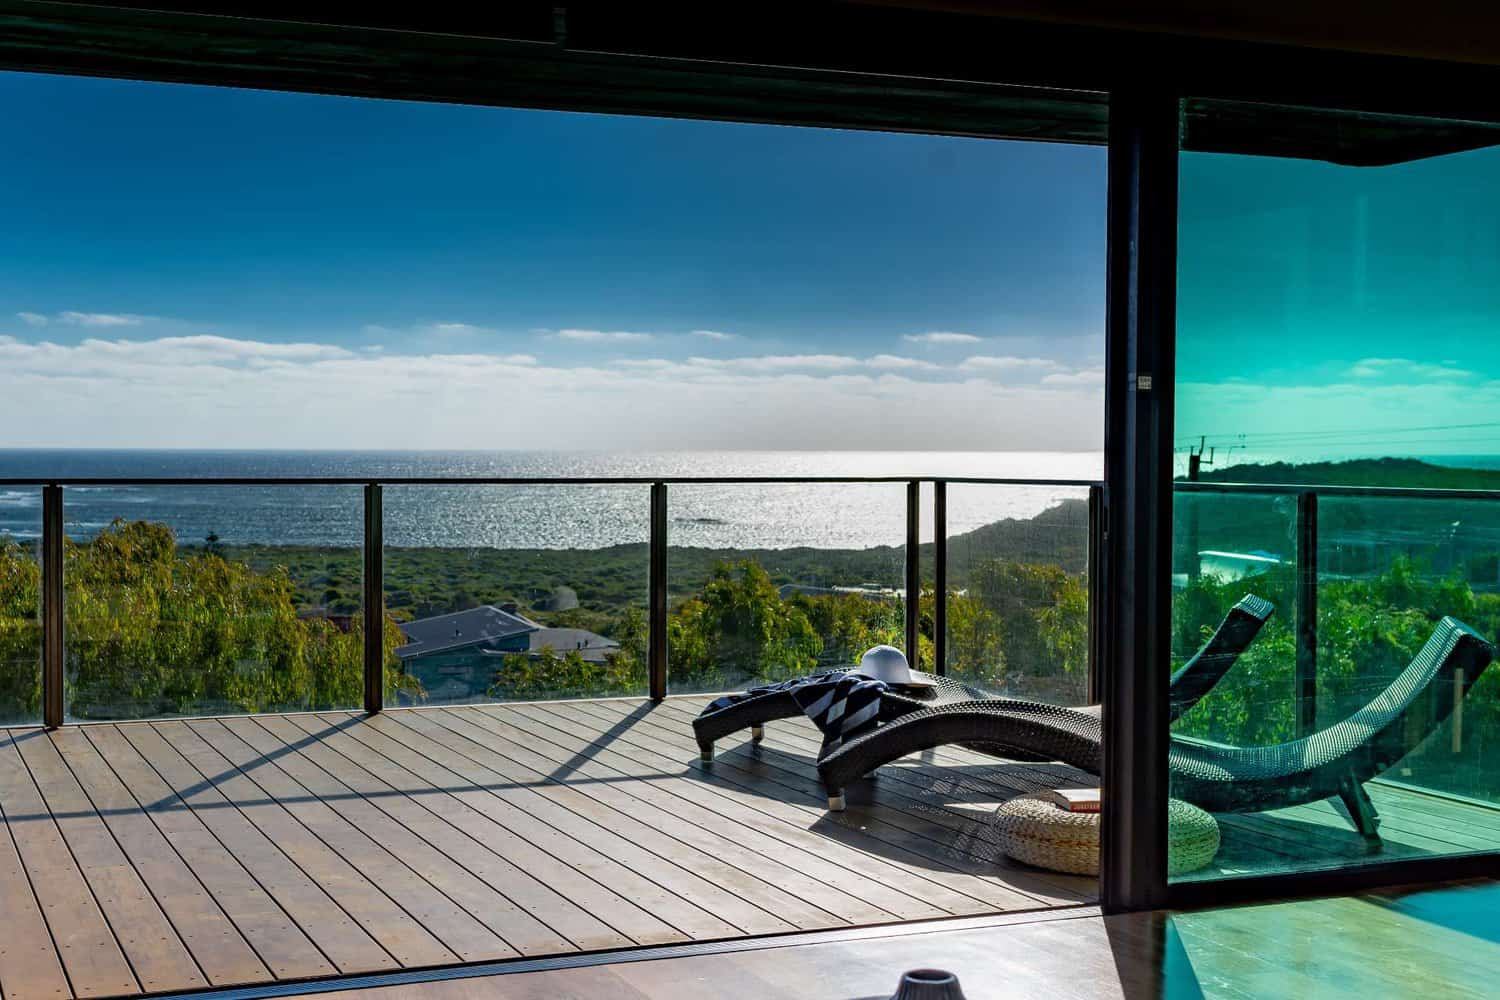 View from a seaside balcony with glass balustrades, showcasing a relaxing sun lounger overlooking the shimmering ocean under a clear sky.
